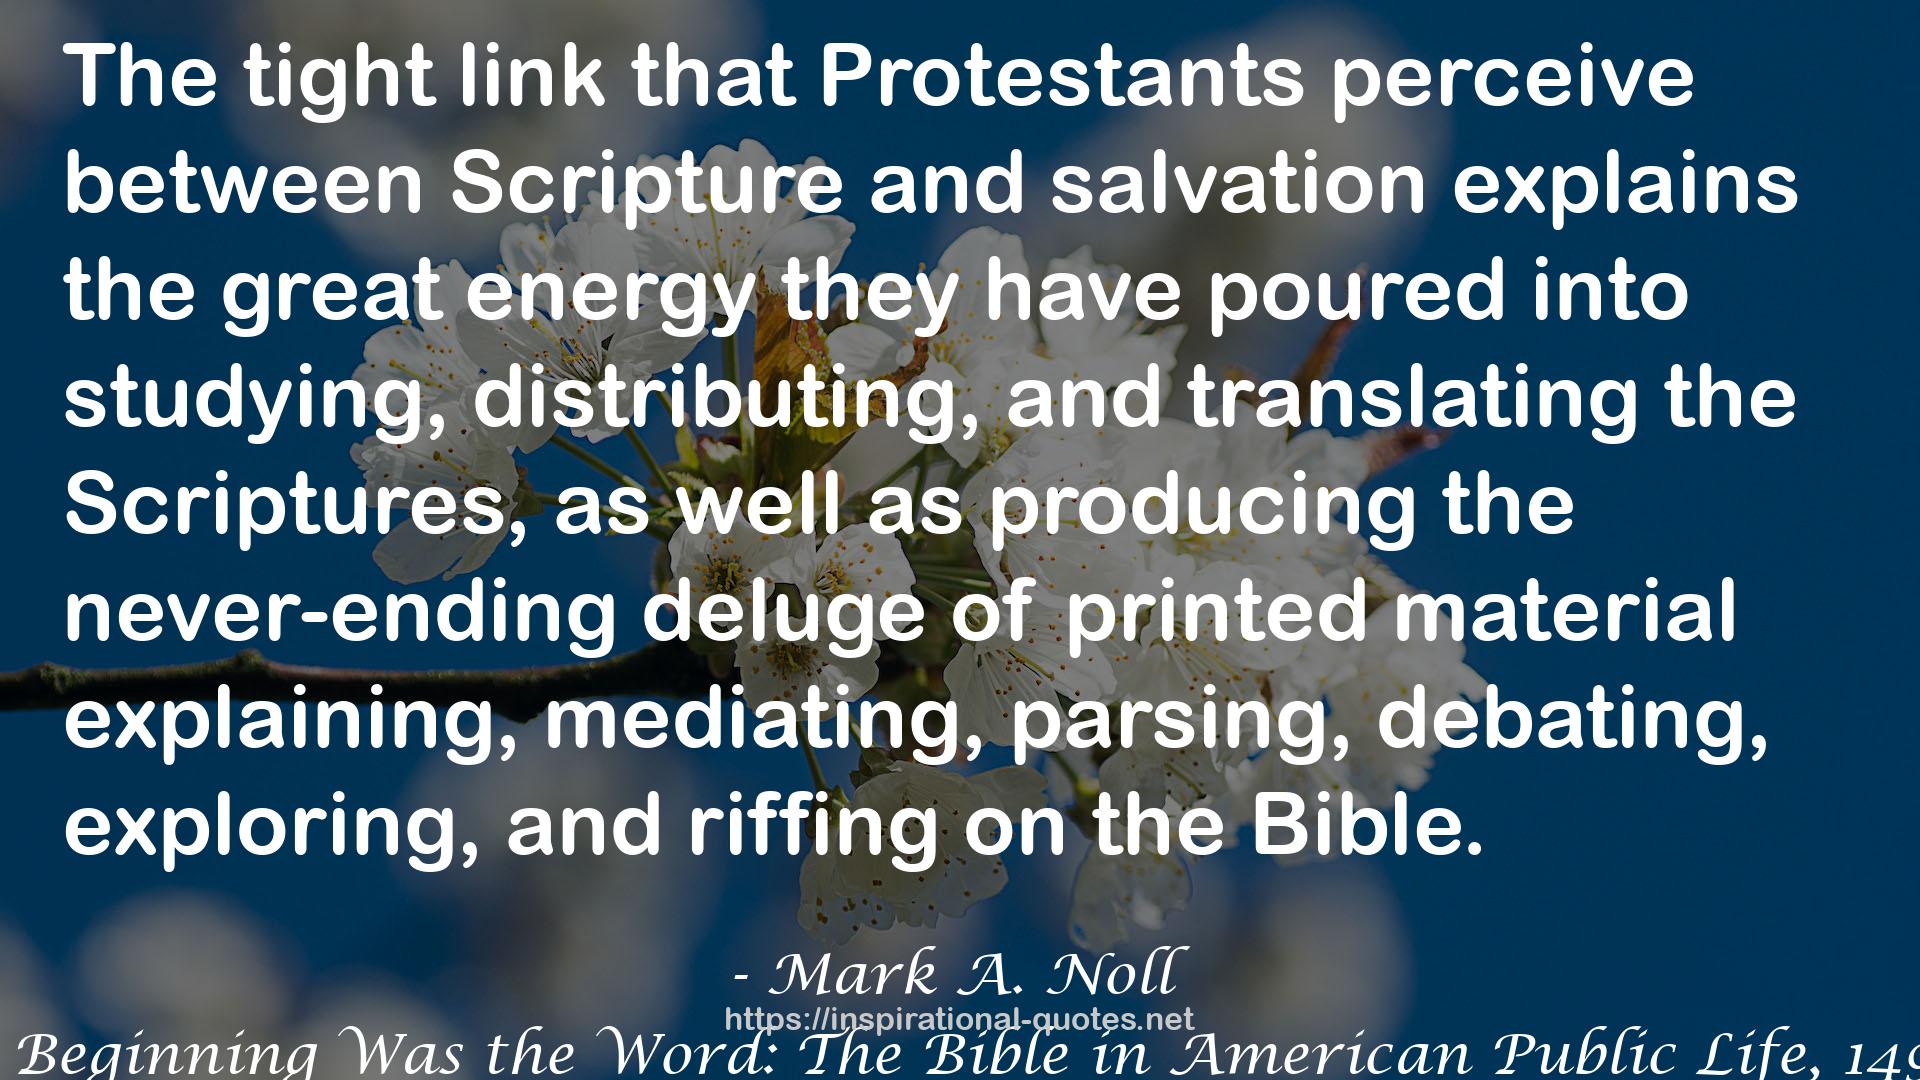 In the Beginning Was the Word: The Bible in American Public Life, 1492-1783 QUOTES